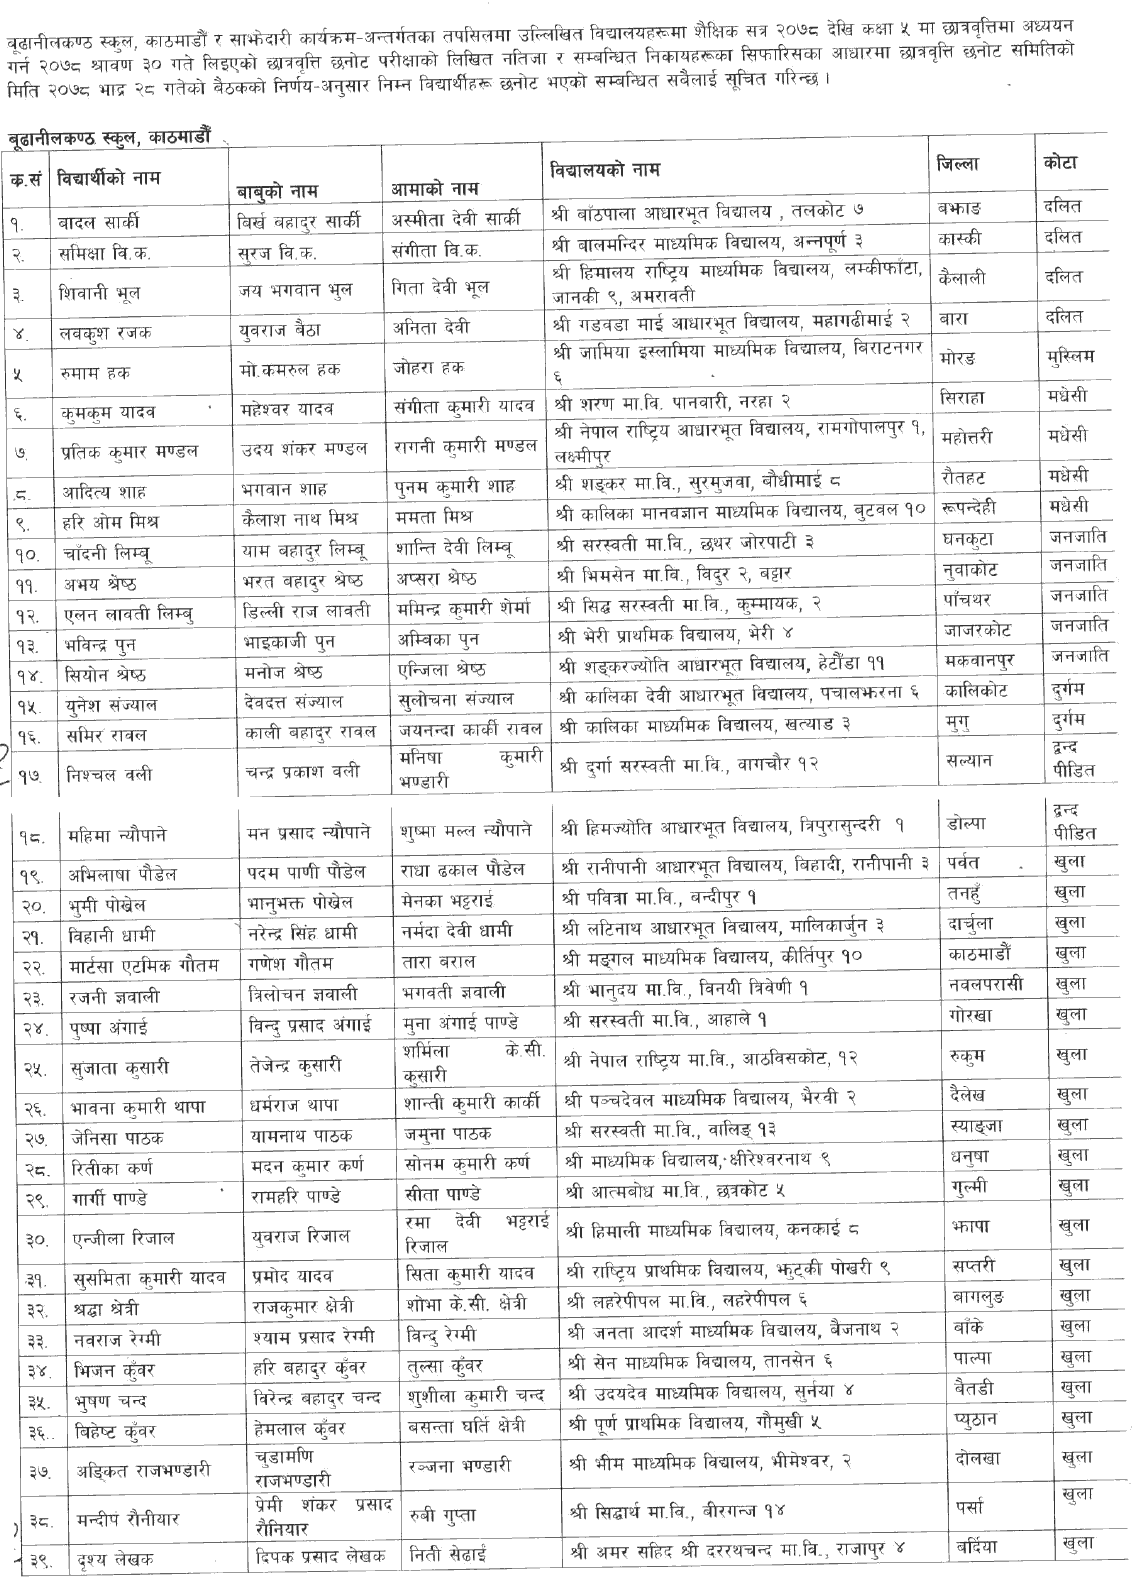 Budhanilkantha School Published Scholarship Result of Class 5 and 6